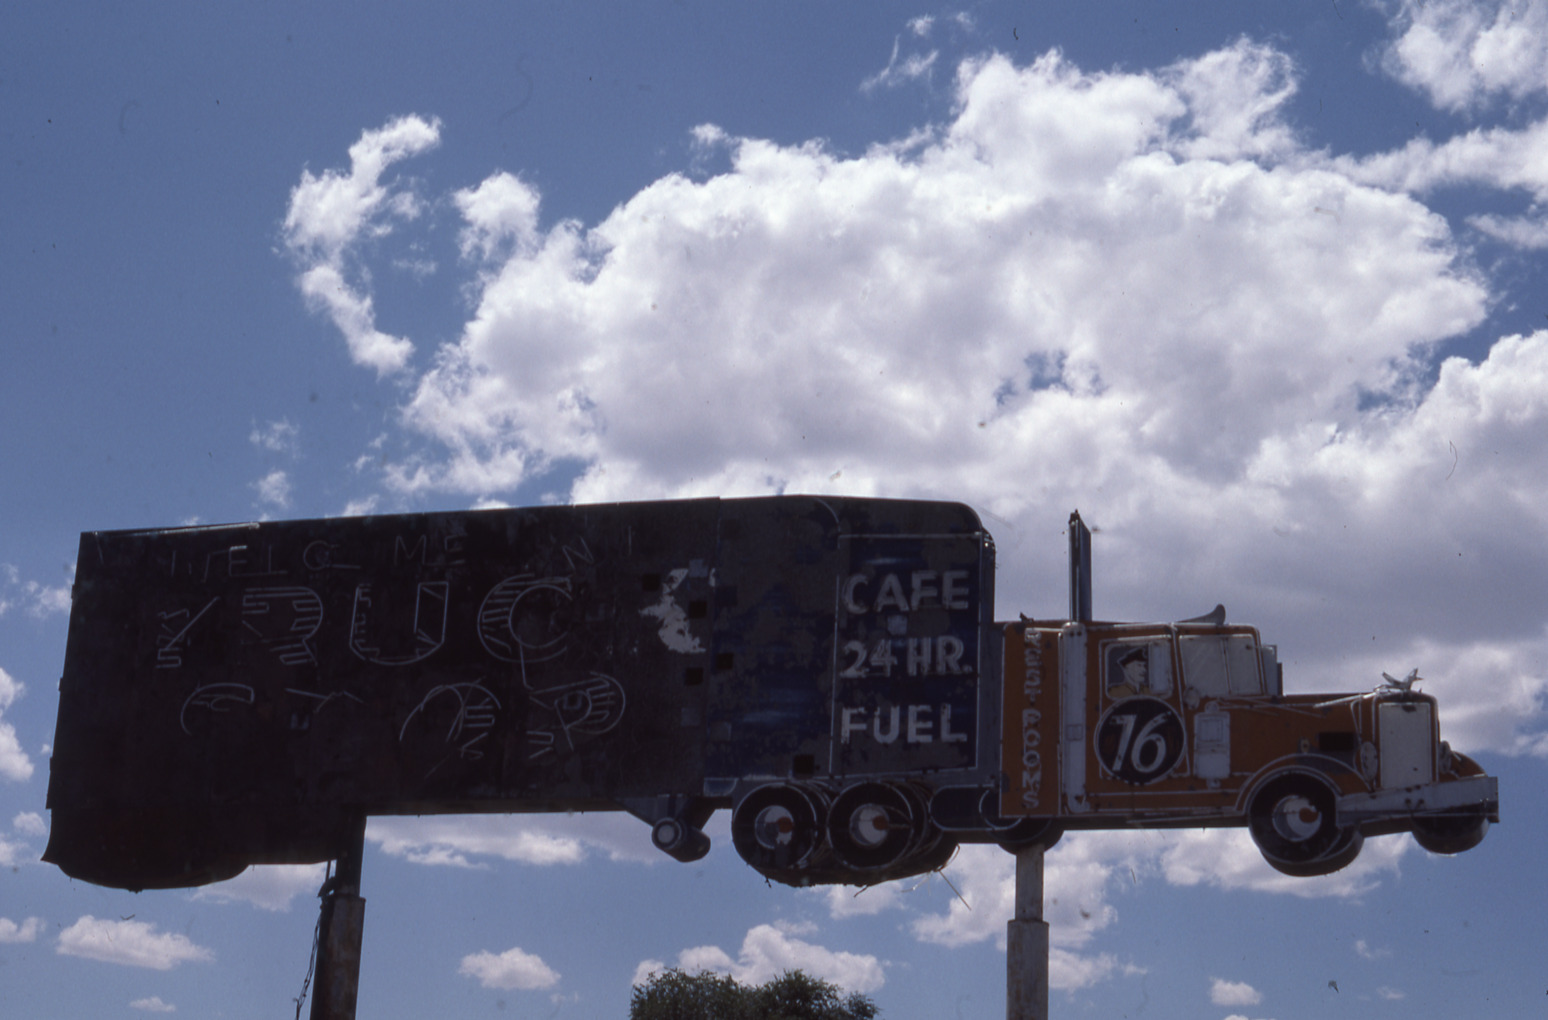 Union 76 Truck Stop double mounted sign, Winnemucca, Nevada: photographic print